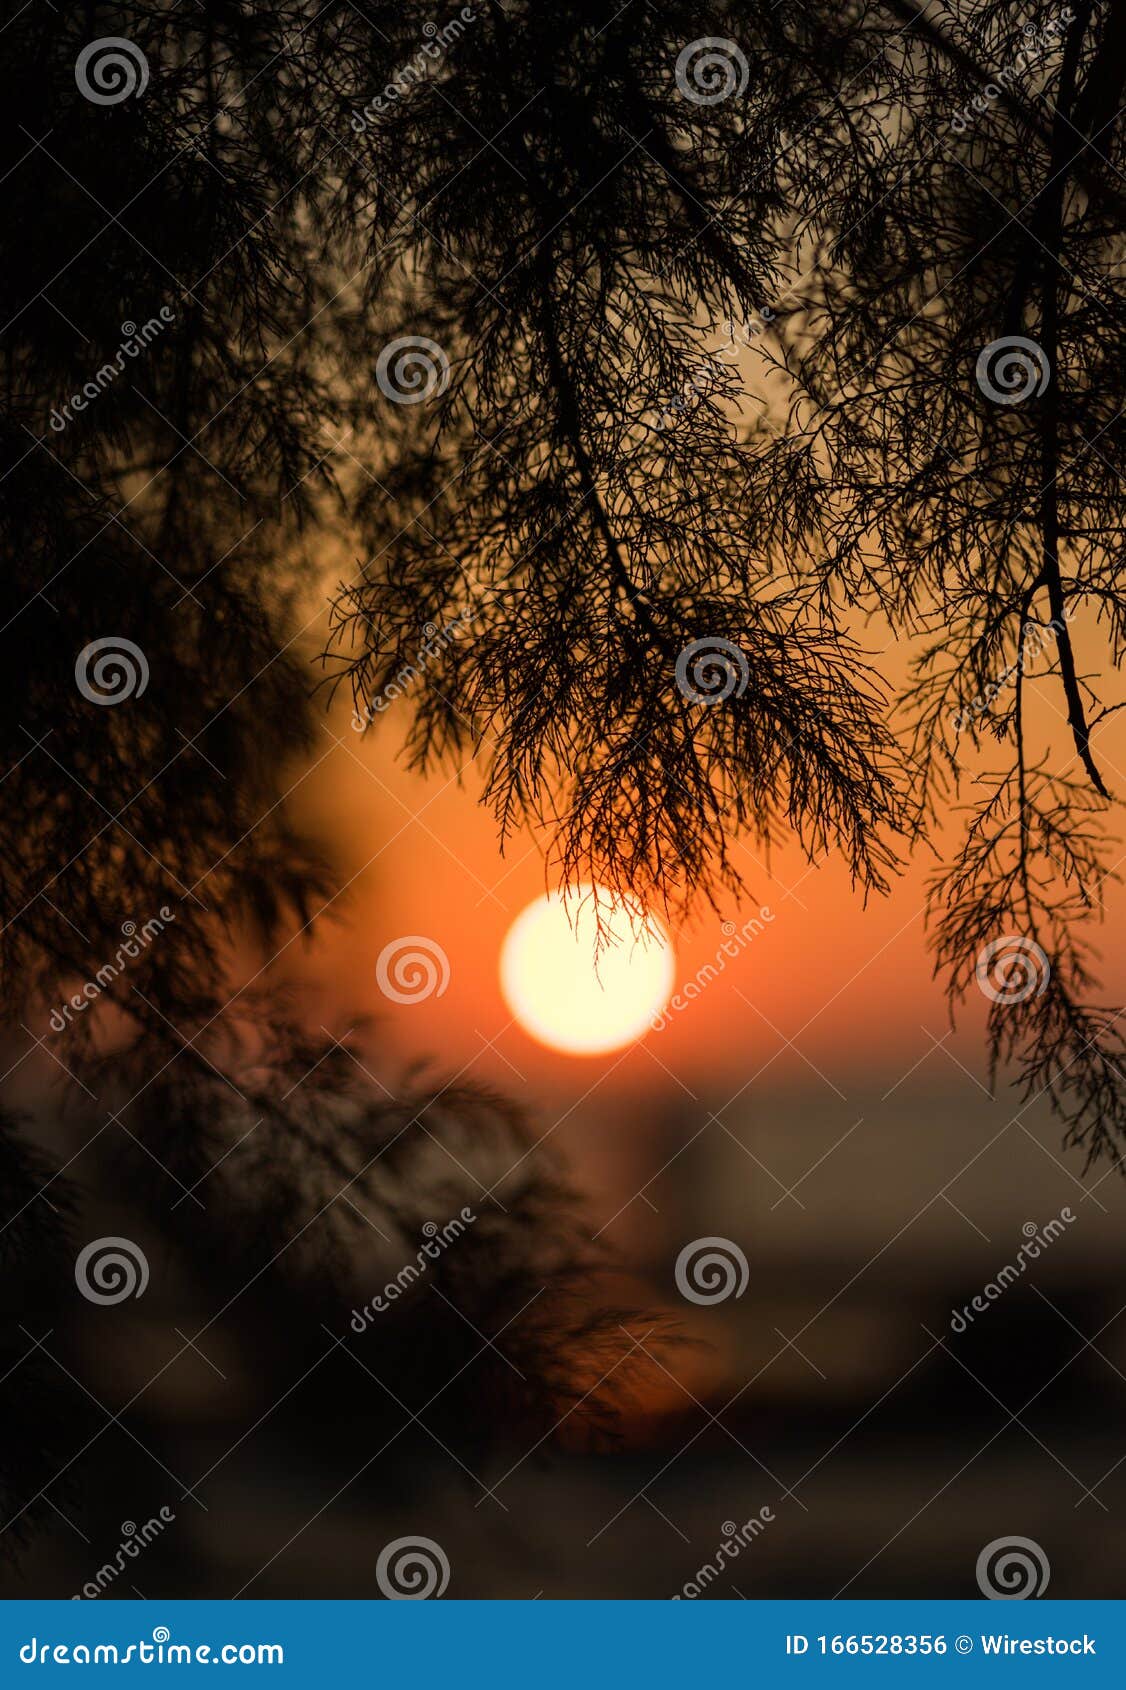 Tree Branches with the Beautiful View of the Sunset Reflecting in the